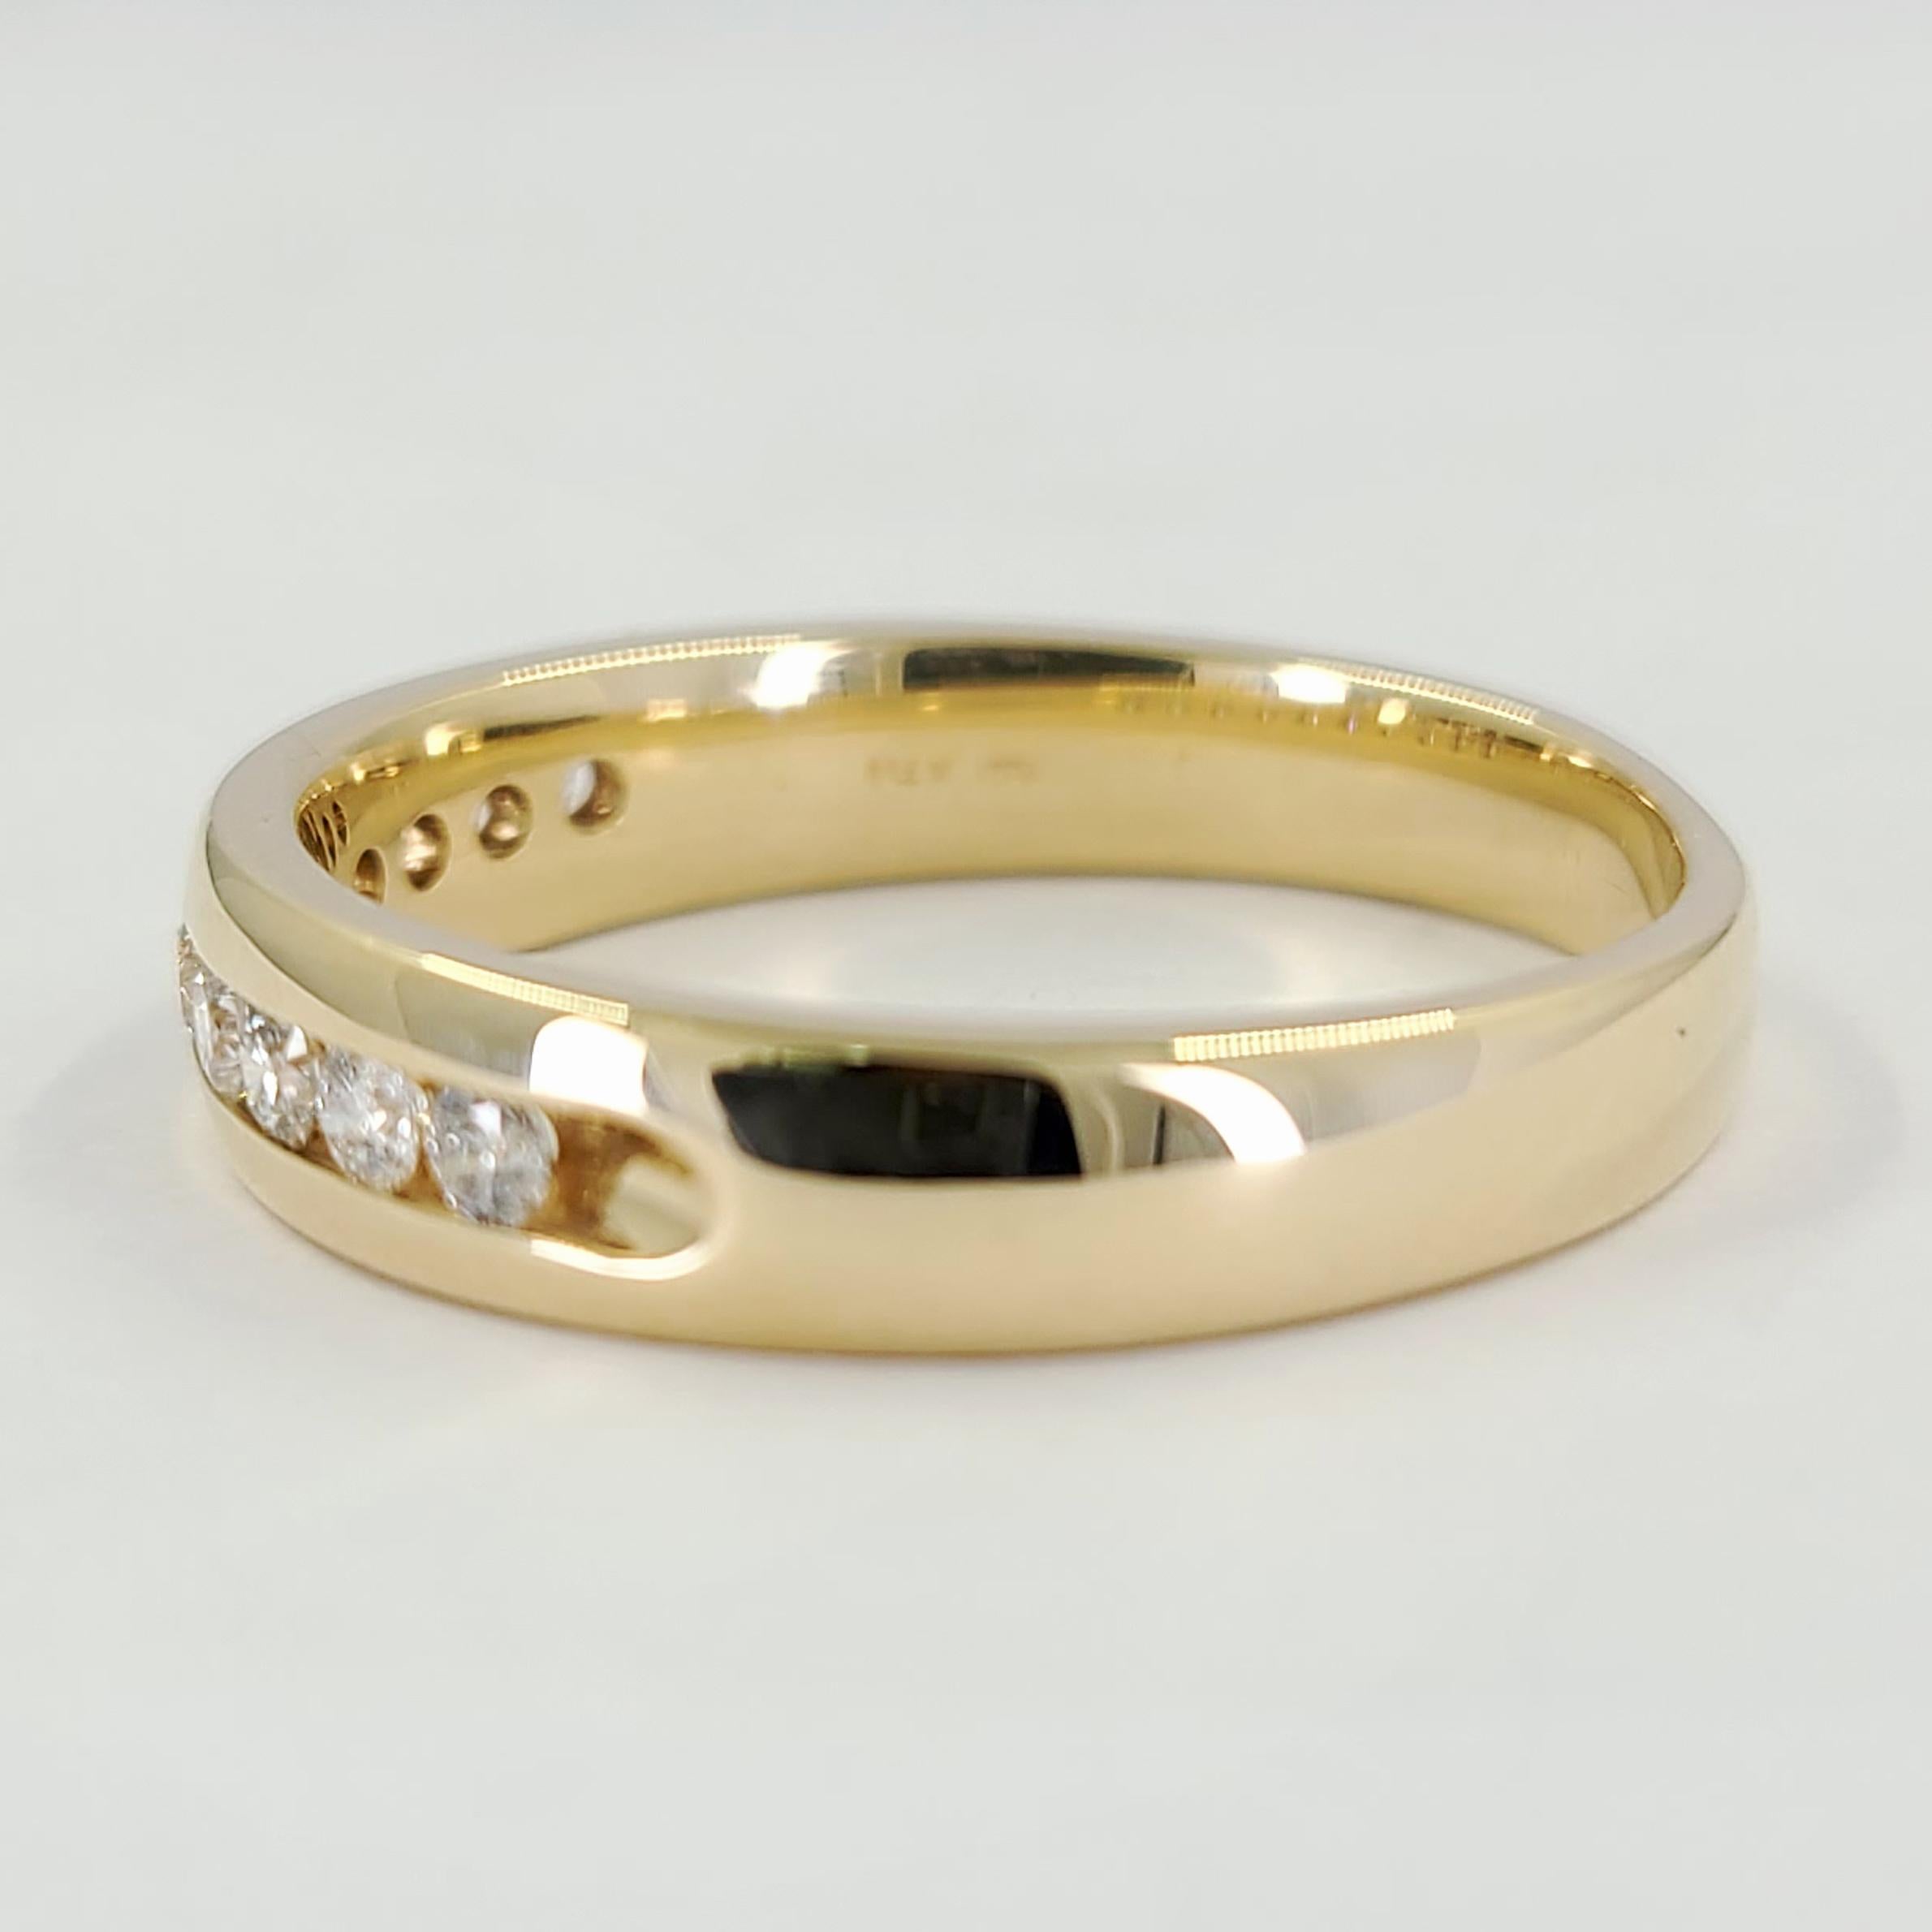 14 Karat Yellow Gold Men's Channel-Set Band Featuring 10 Round Brilliant Cut Diamonds Of SI Clarity & H Color Totaling 0.50 Carats. Finger Size 11; Purchase Includes One Sizing Service. Finished Weight Is 6.0 Grams.